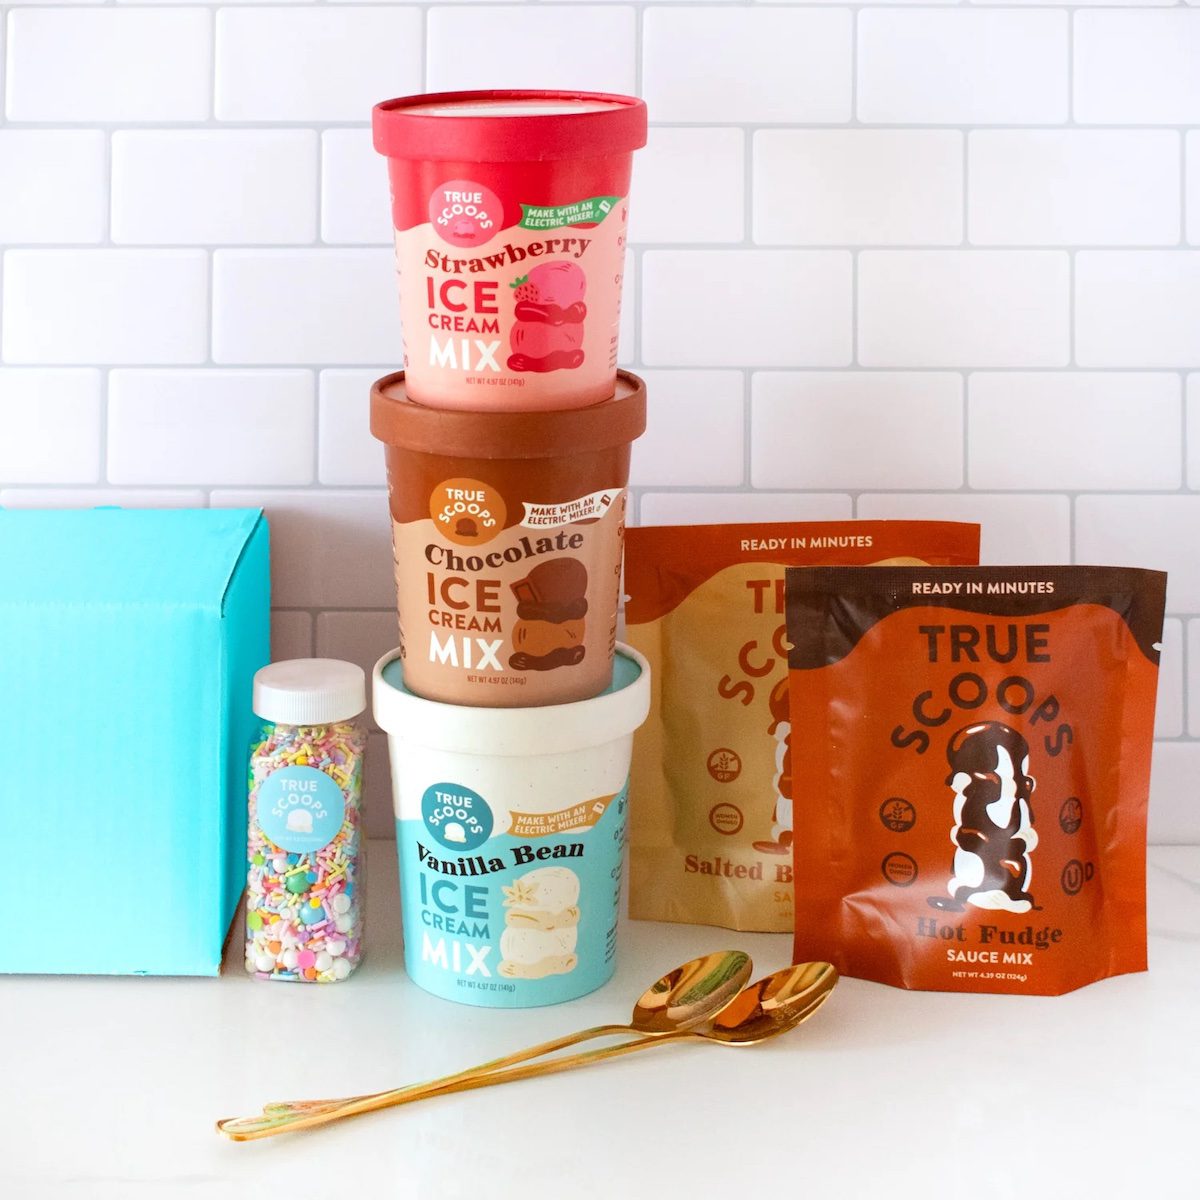 True scoops ice cream making kit with mixes and containers.